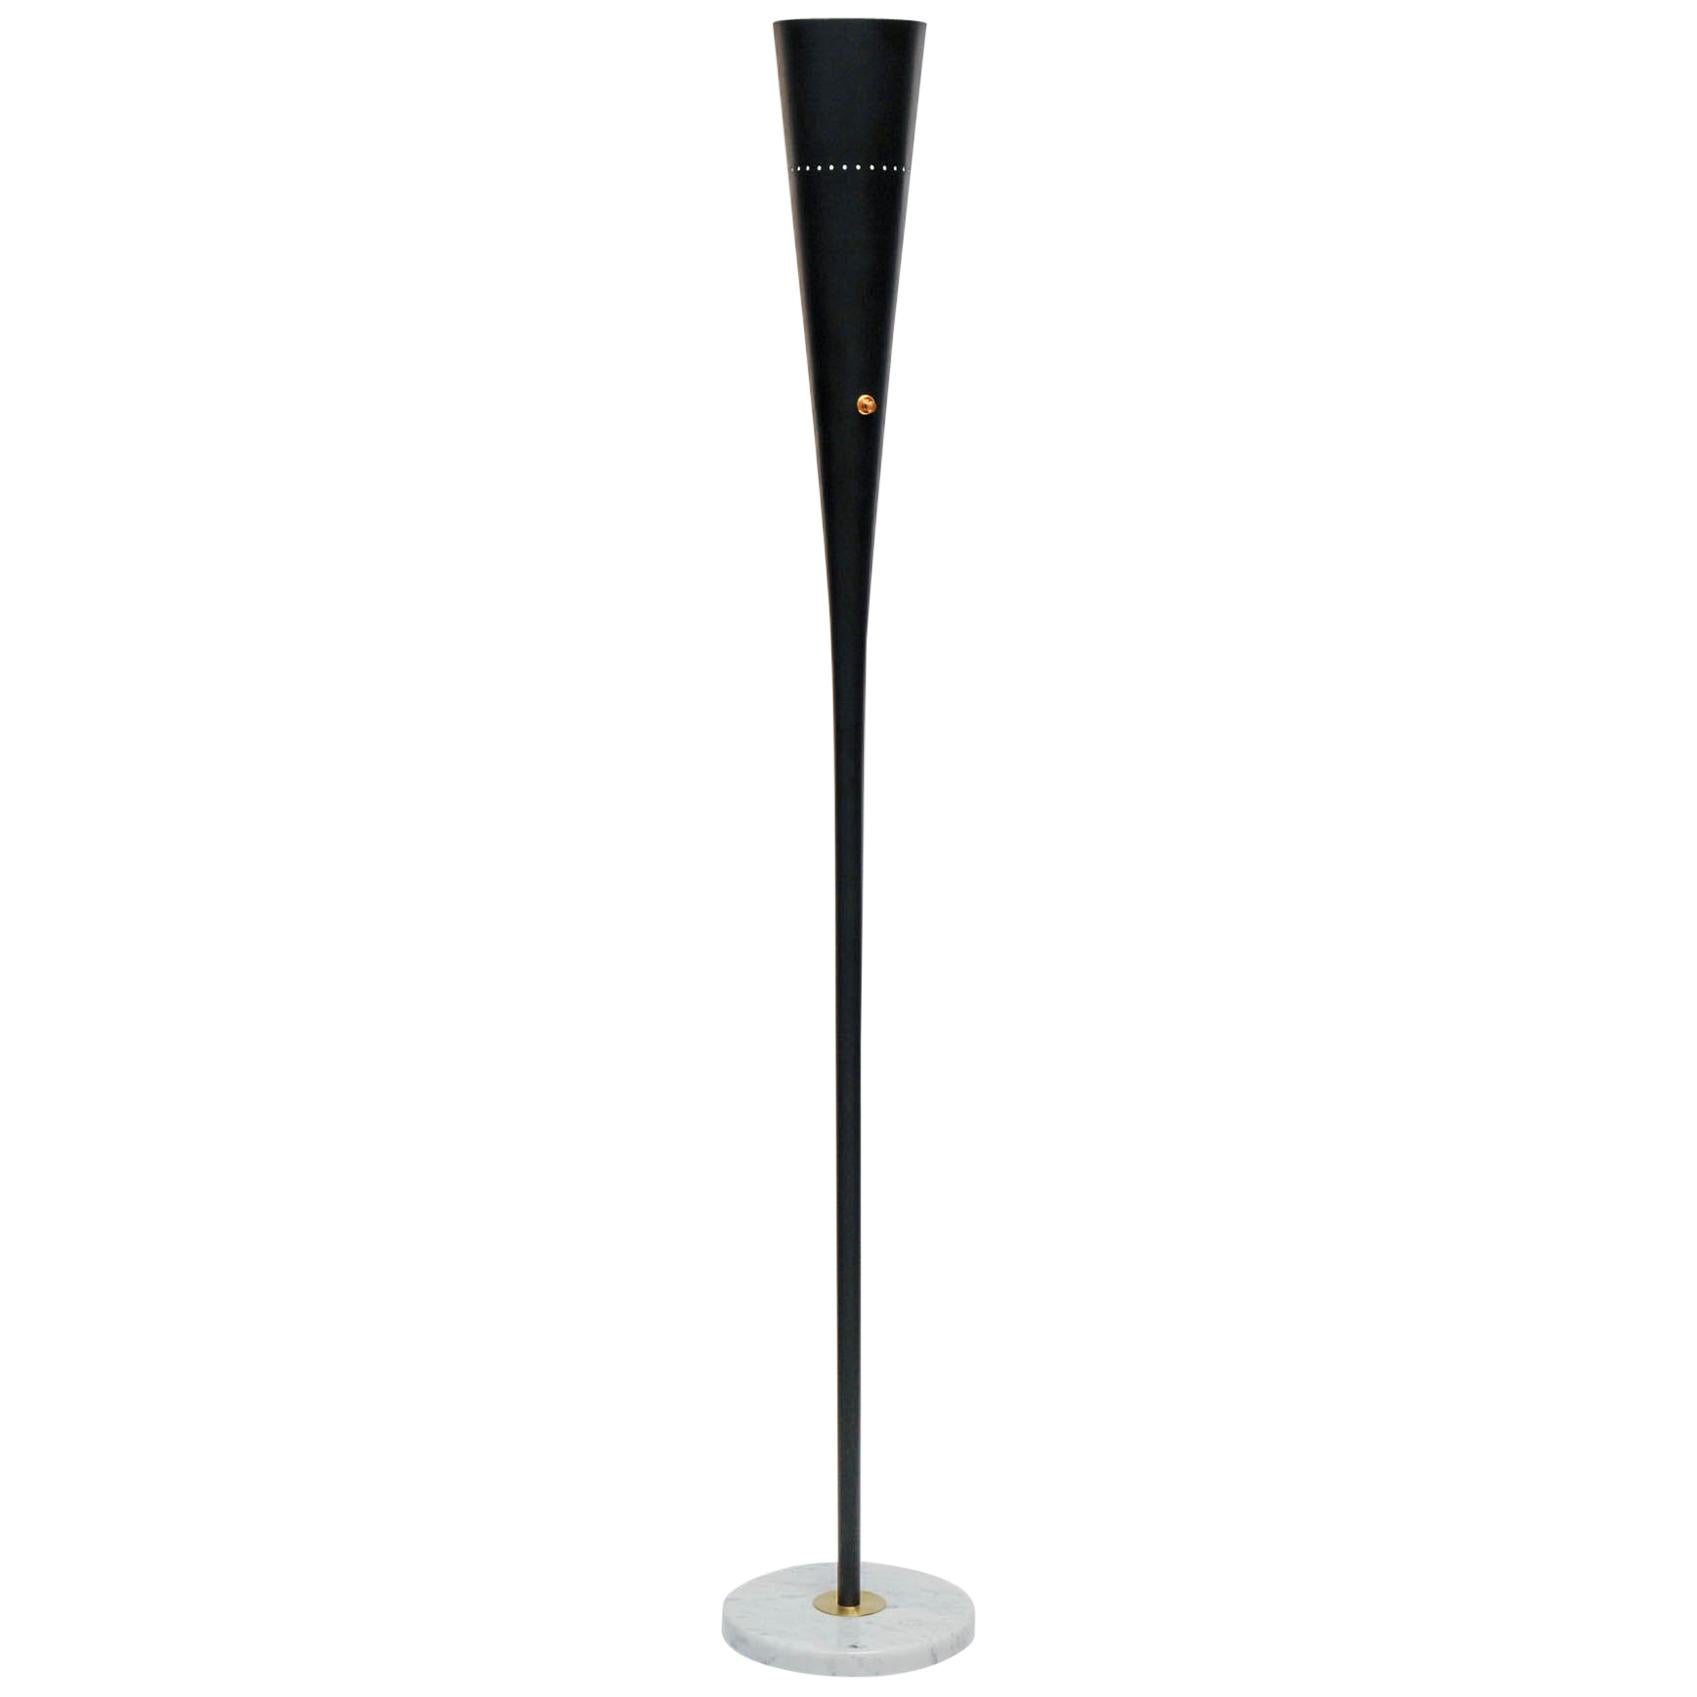 Pair of Black Metal Floor Lamps with Marble Feet and Brass Accents